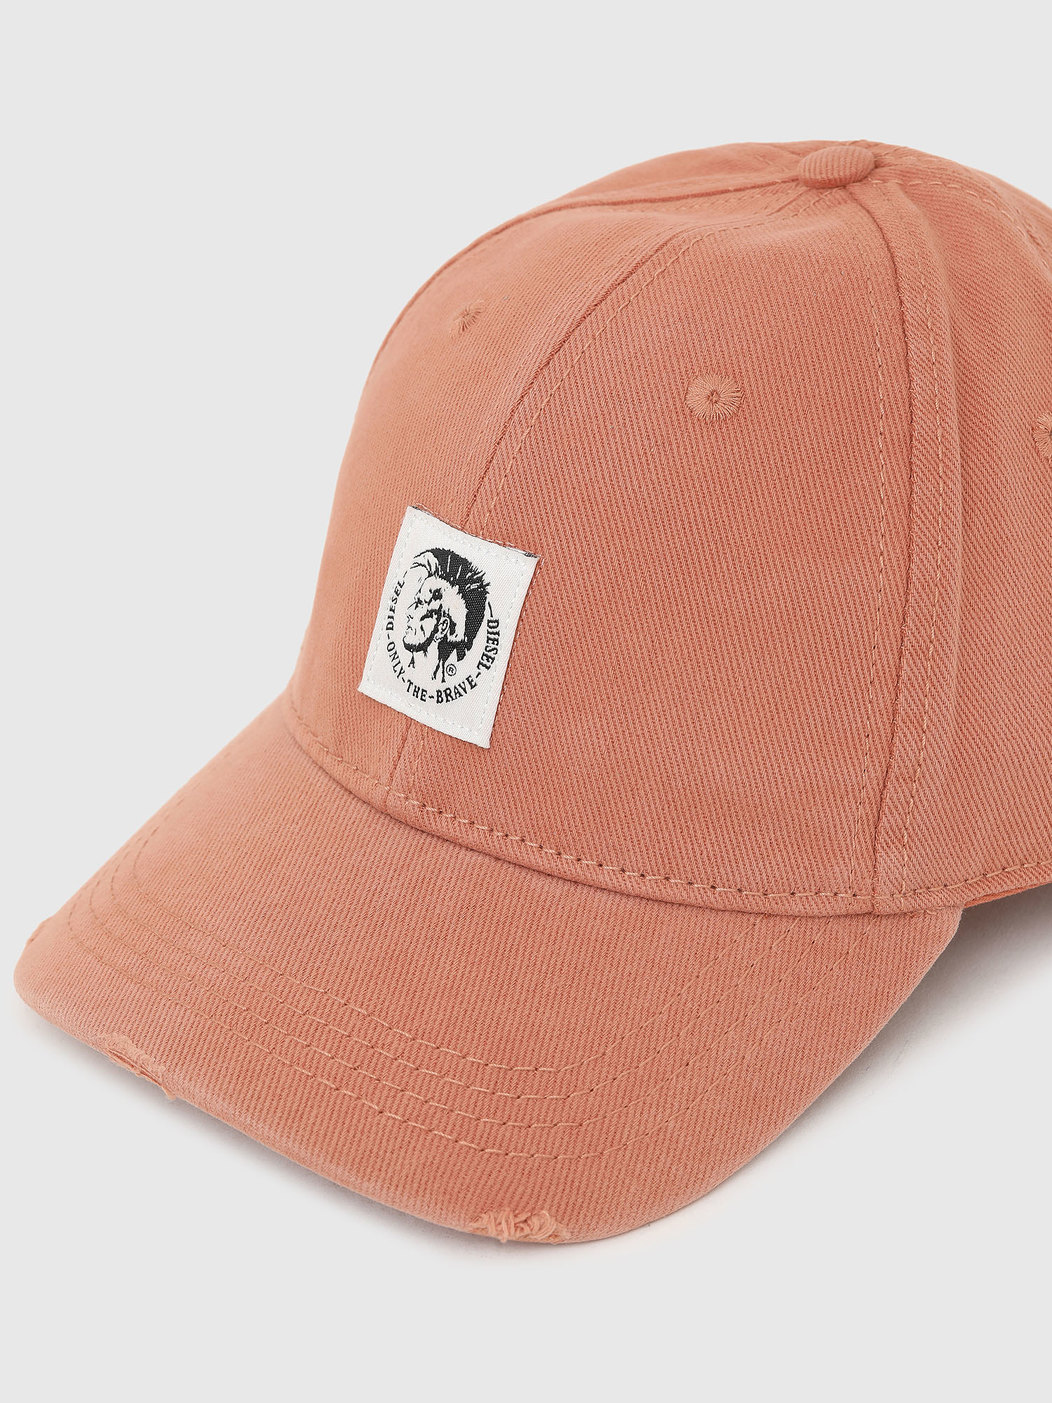 Twill Baseball Cap with Mohawk Patch